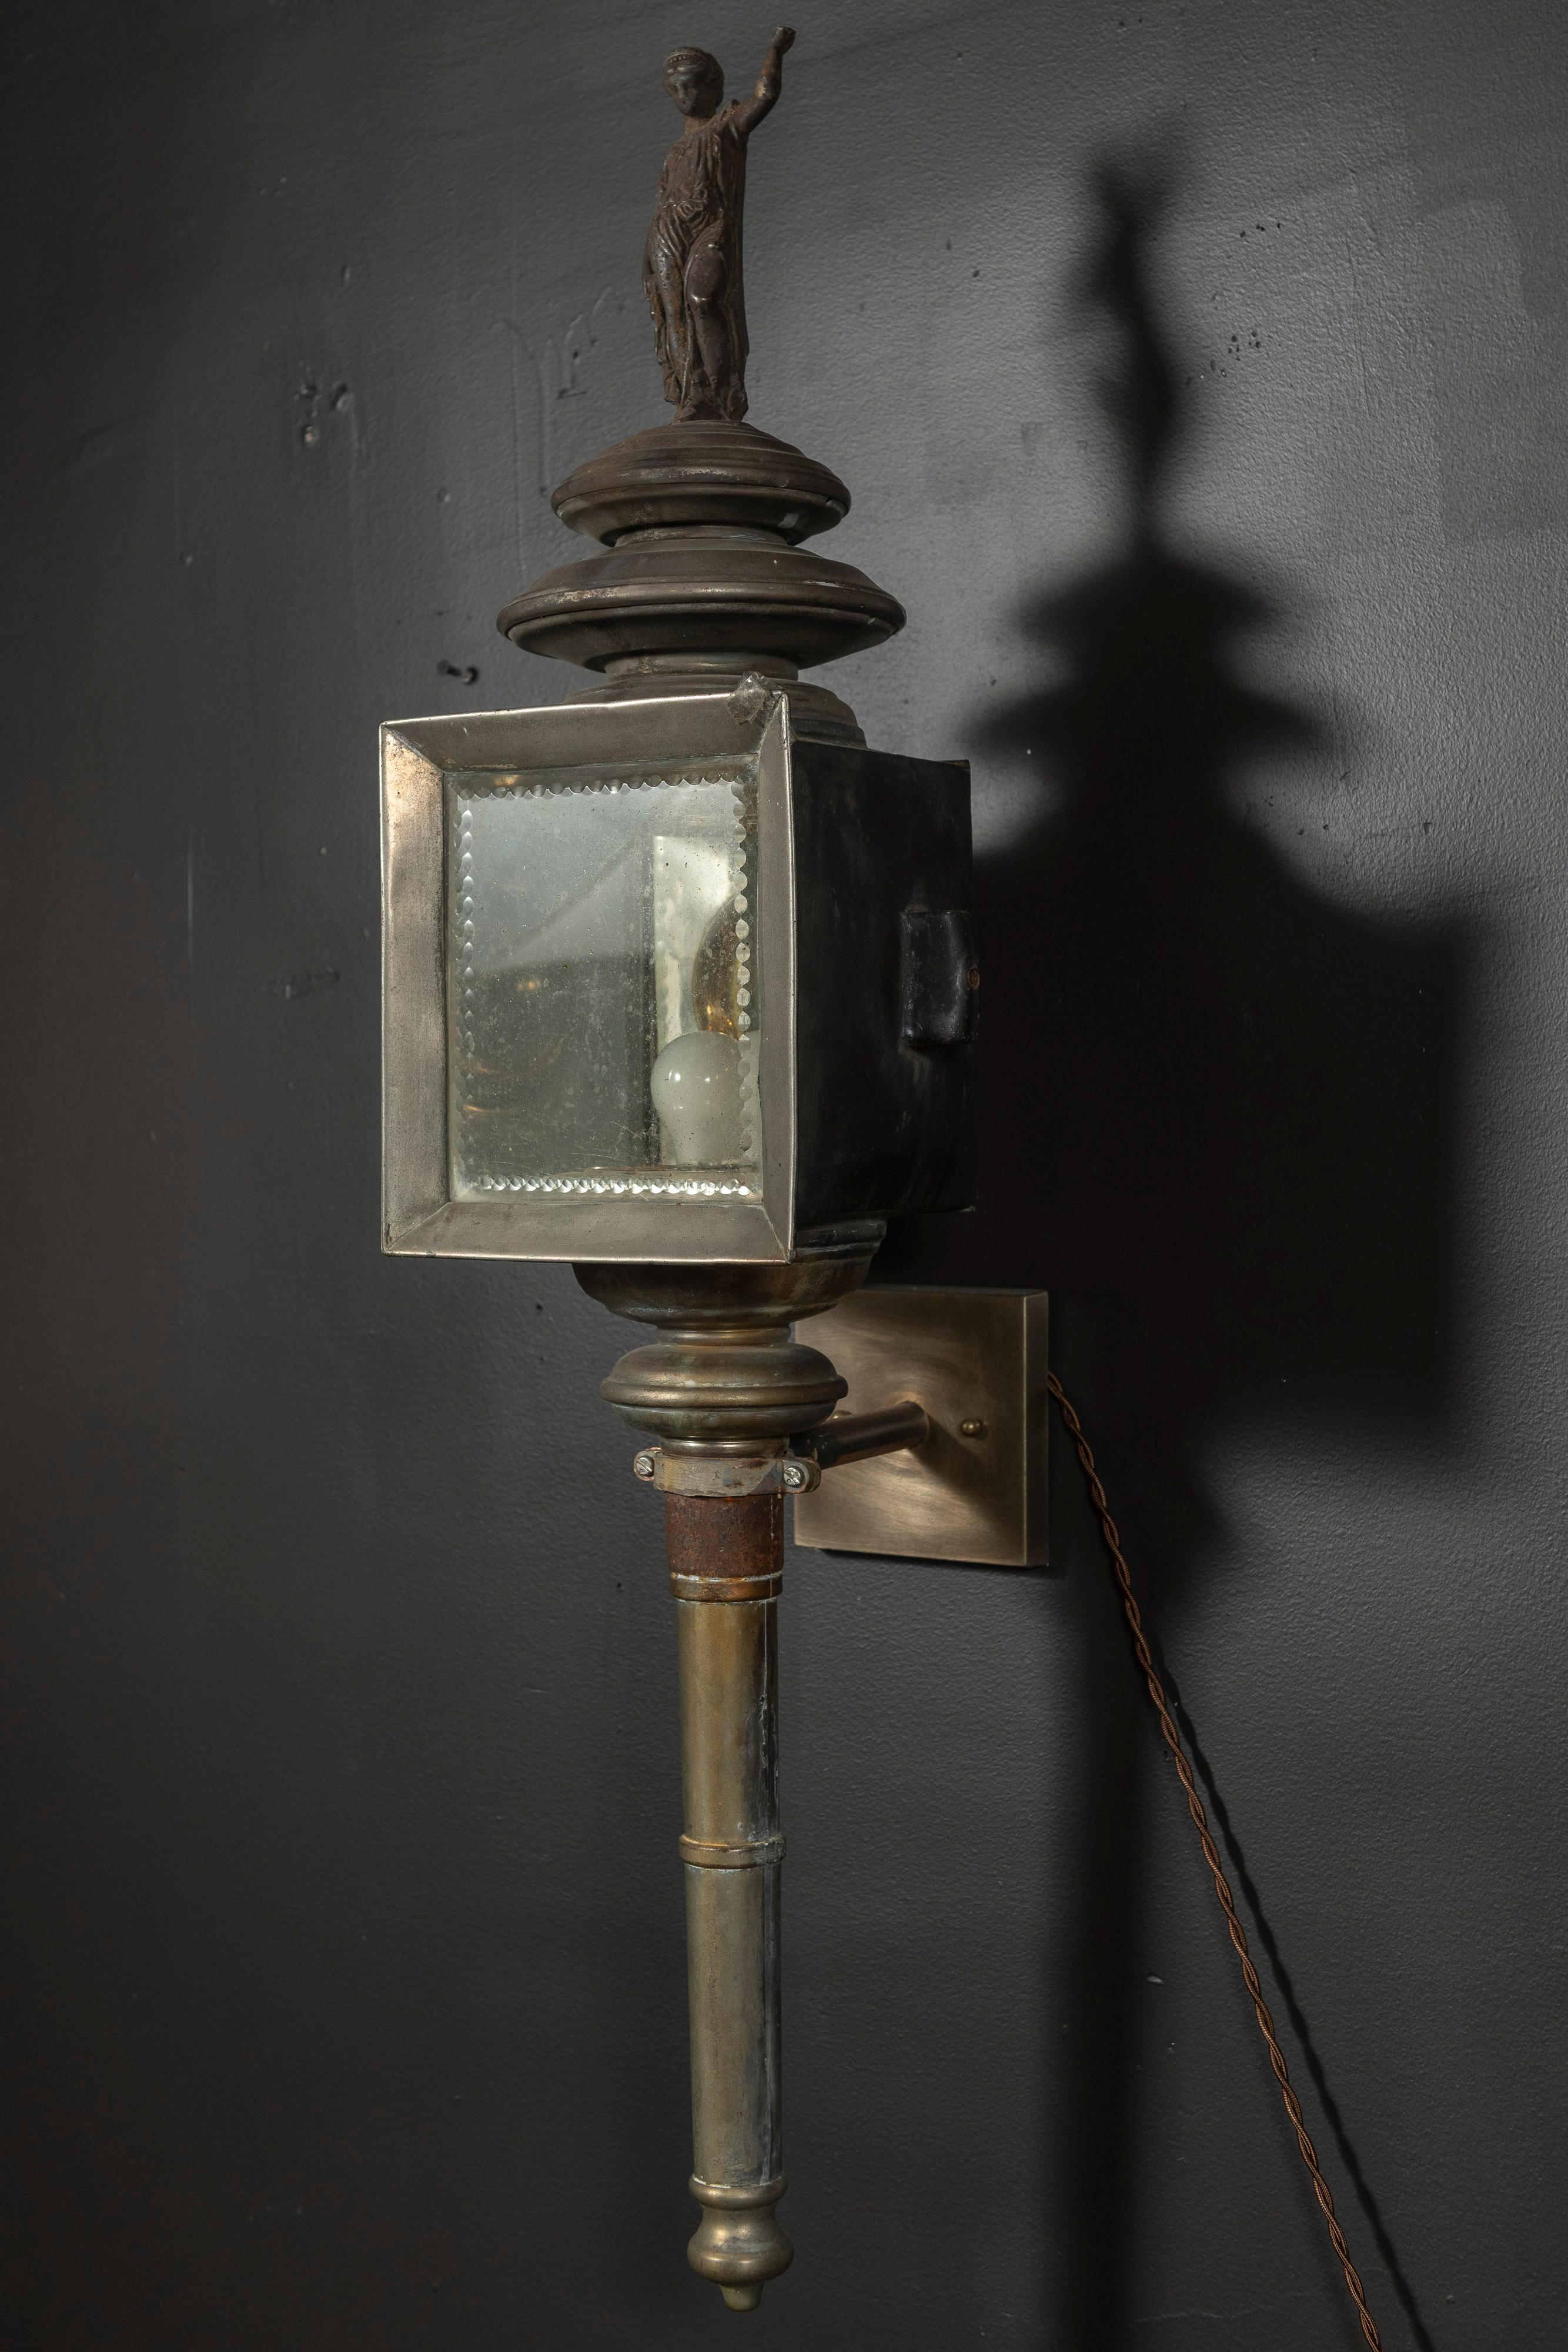 Pair of rare antique carriage lanterns in brass, mercury glass and metal with a classical figure enhancing the top. These lanterns may be installed in both interior and protected exterior locations, at an entrance or as wall sconces.